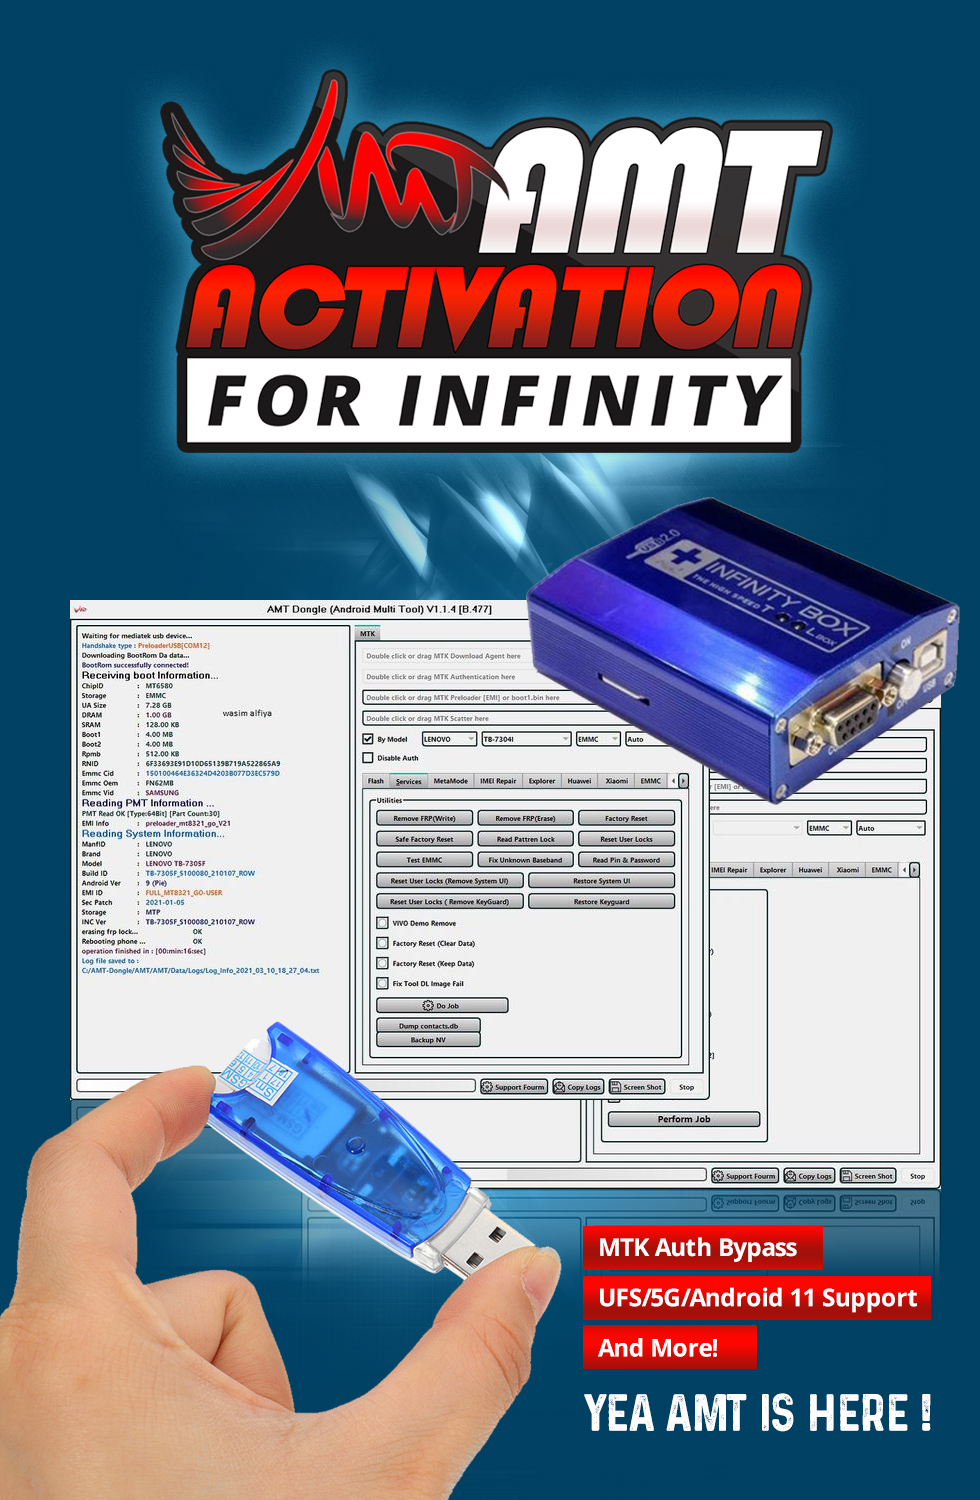 AMT-Dongle software activation for Infinity